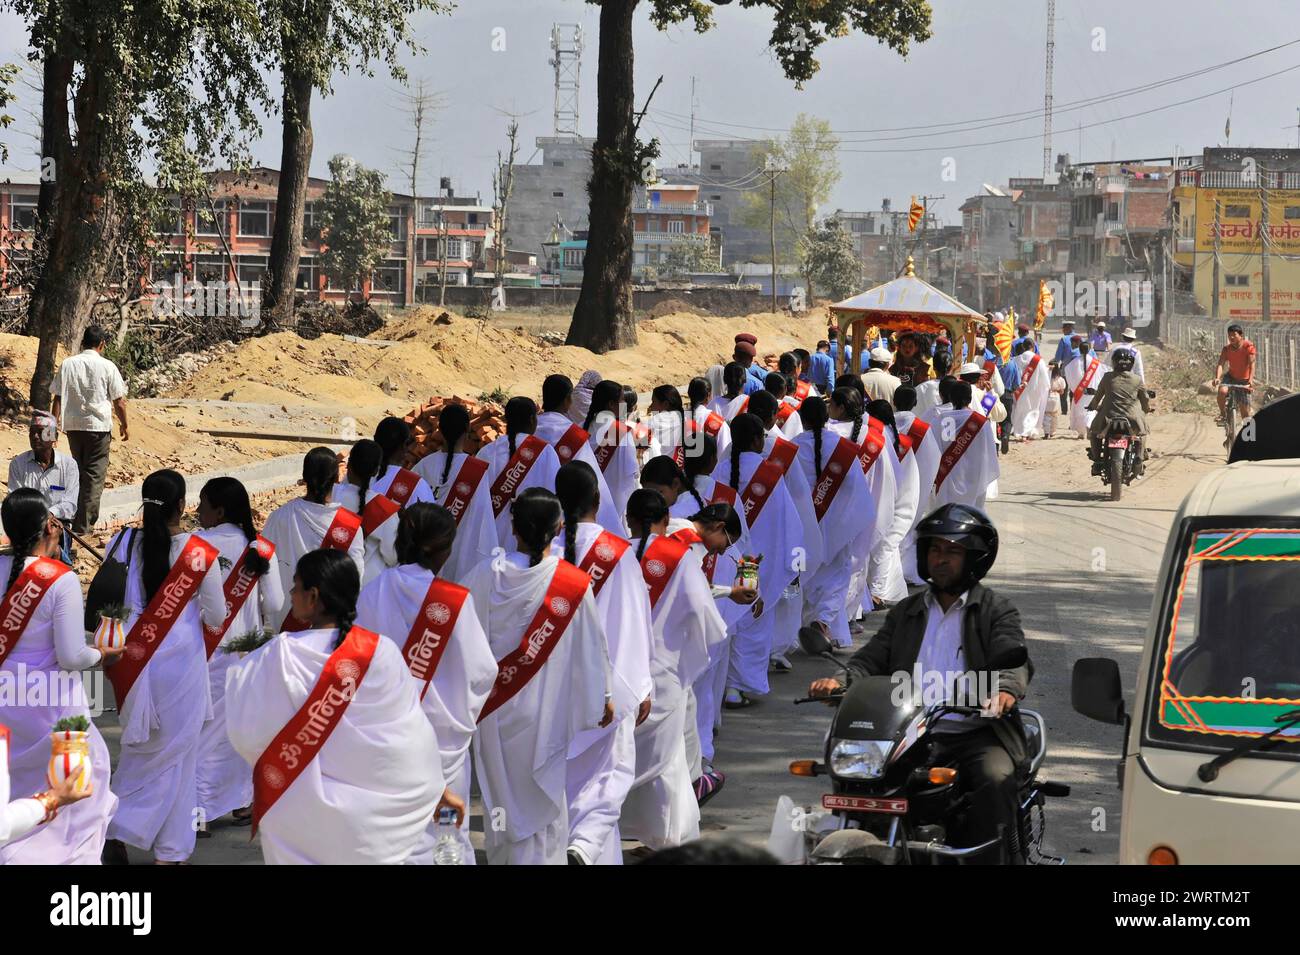 People in traditional dress marching in an urban environment, Bhairahawa, Nepal Stock Photo